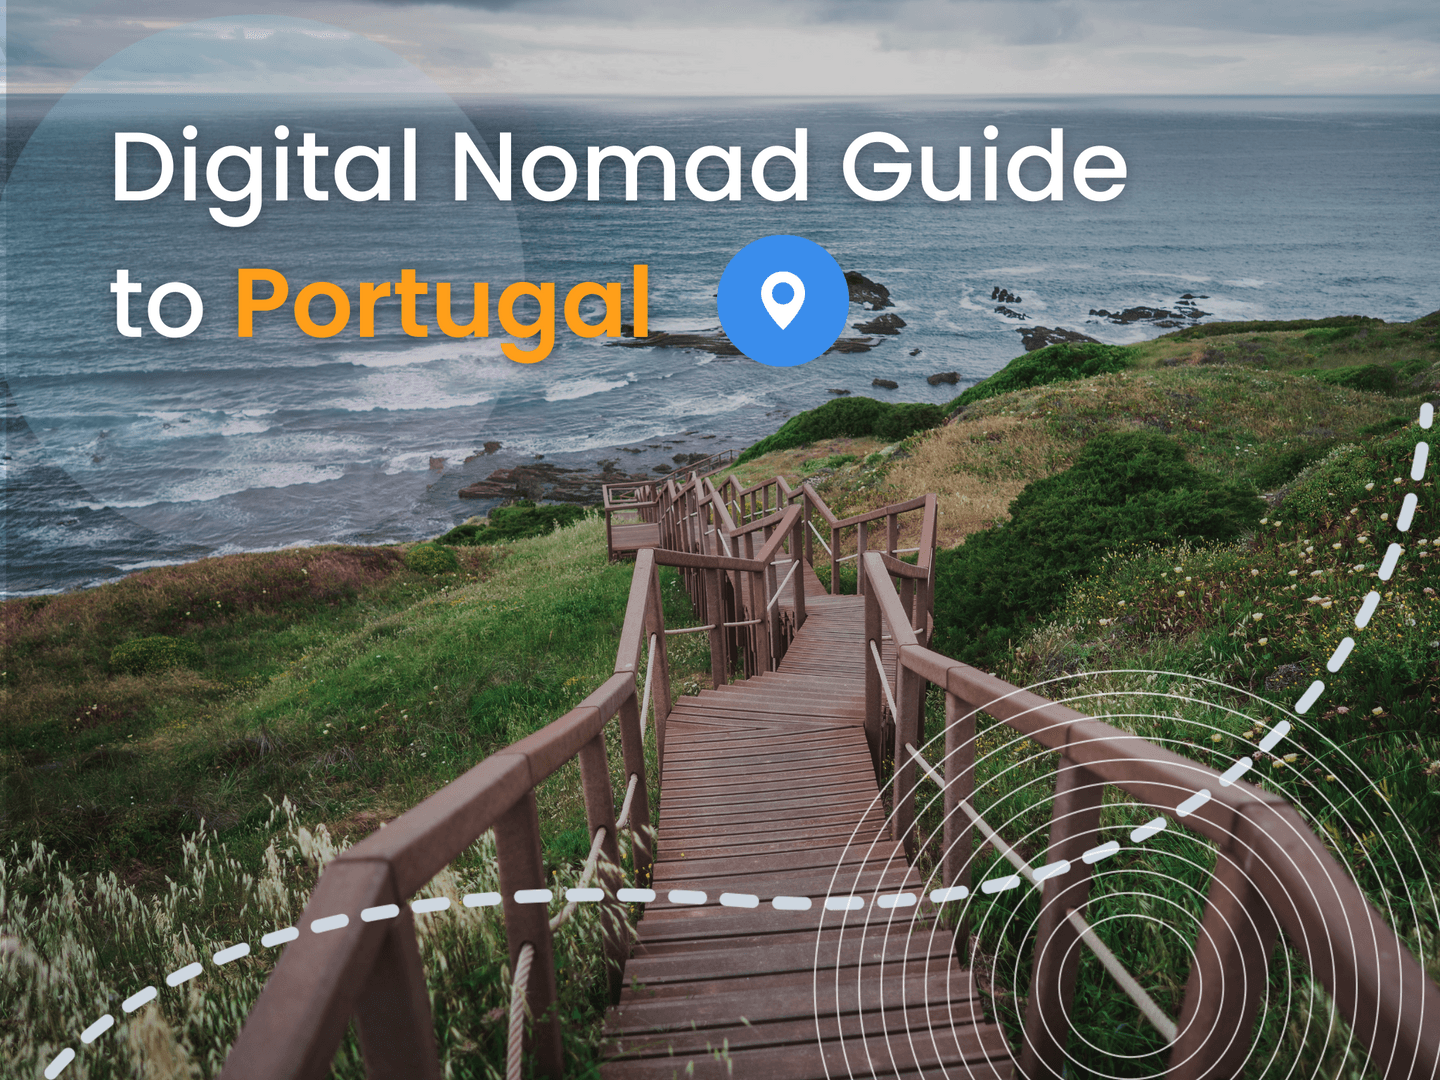 Portugal became popular with digital nomads, crypto investors, and remote workers